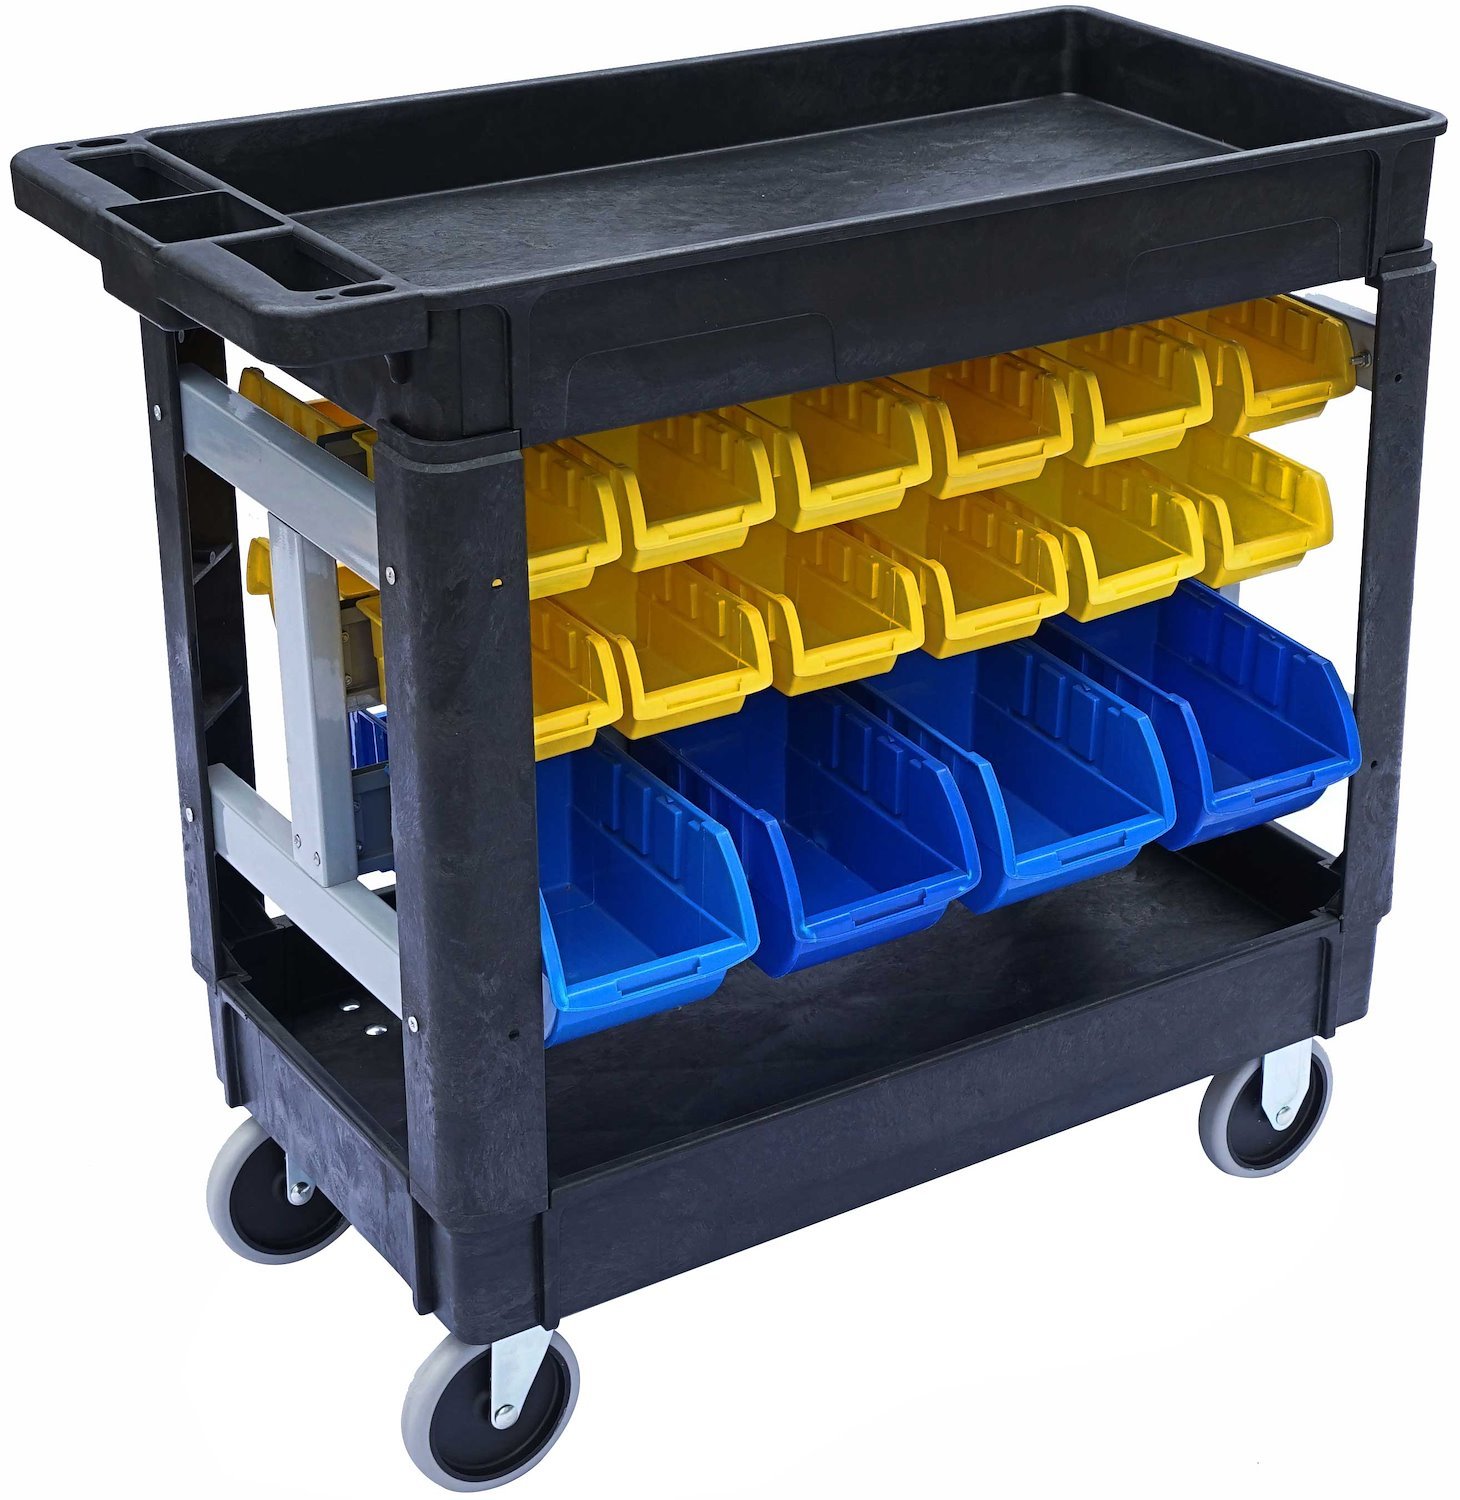 JEGS 81436: Utility Cart with Storage Bins - JEGS